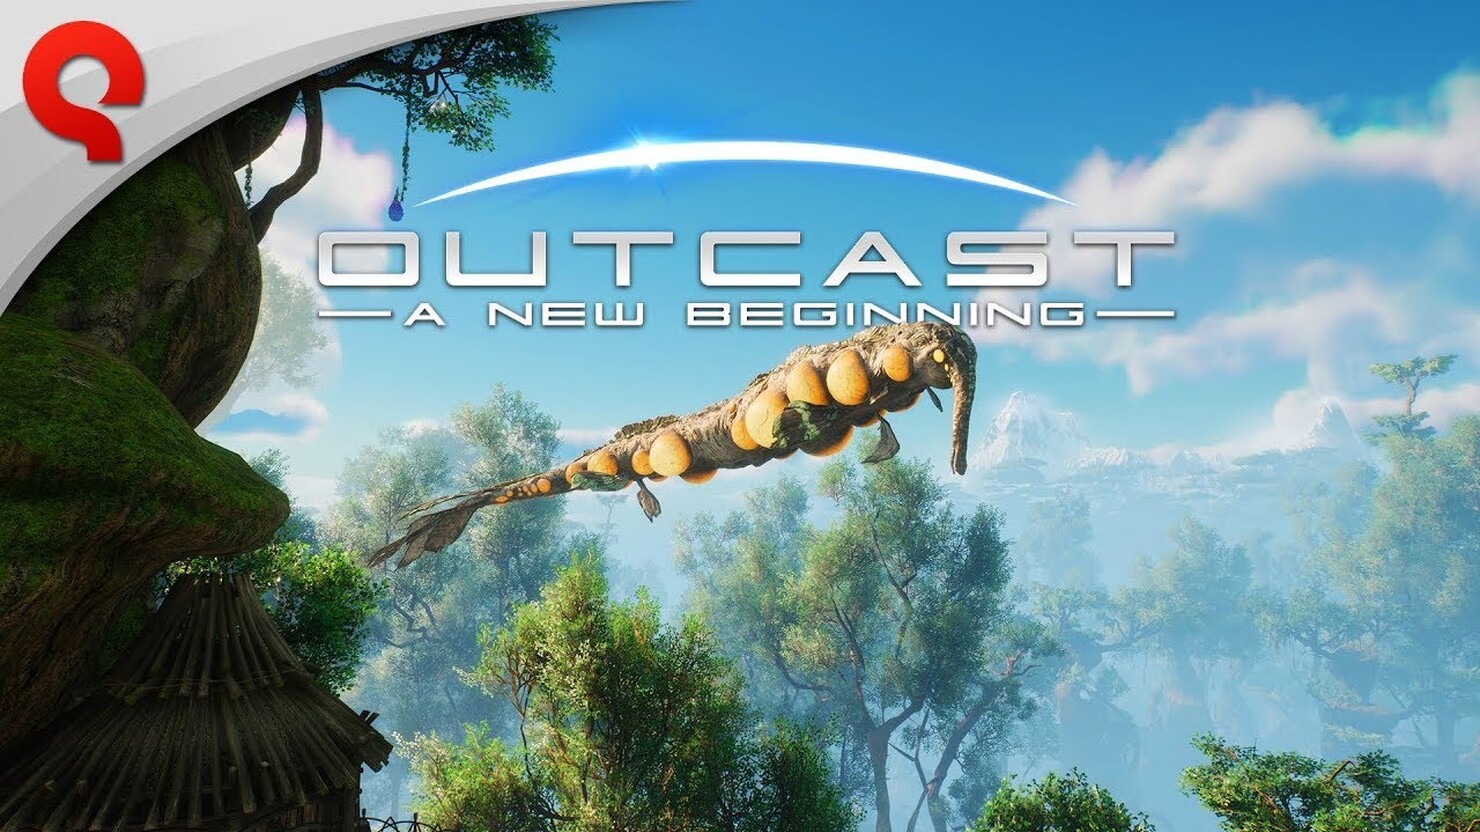 Outcast a new beginning pc. Outcast - a New beginning. Outcast - a New beginning игра. Outcast 2 a New beginning. Outcast a New beginning вооружение.